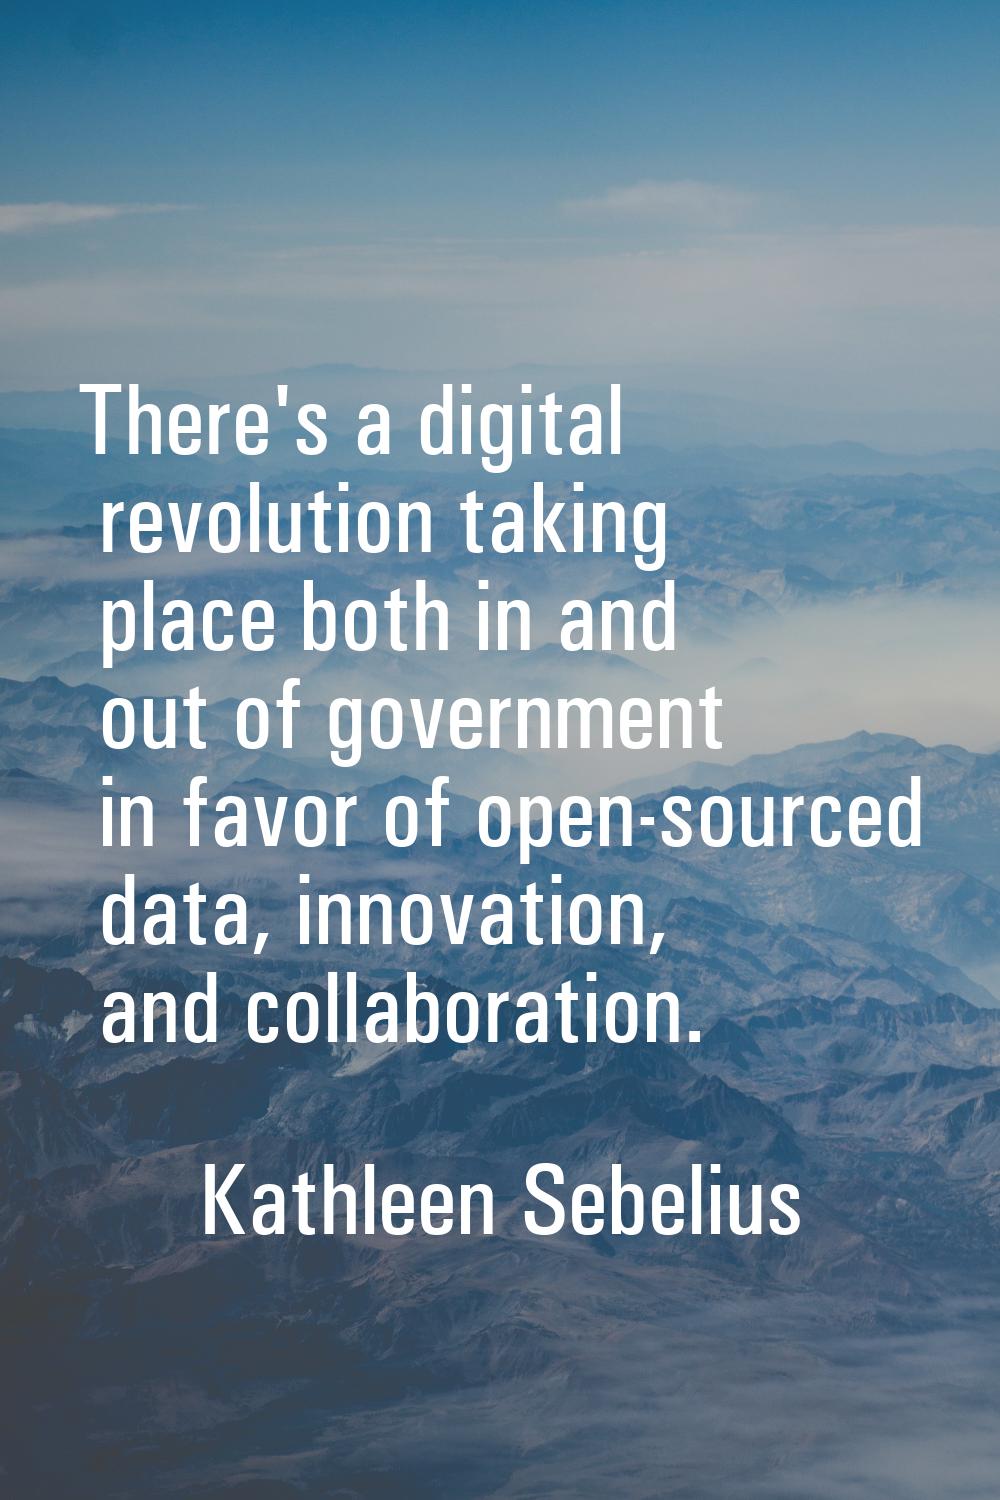 There's a digital revolution taking place both in and out of government in favor of open-sourced da